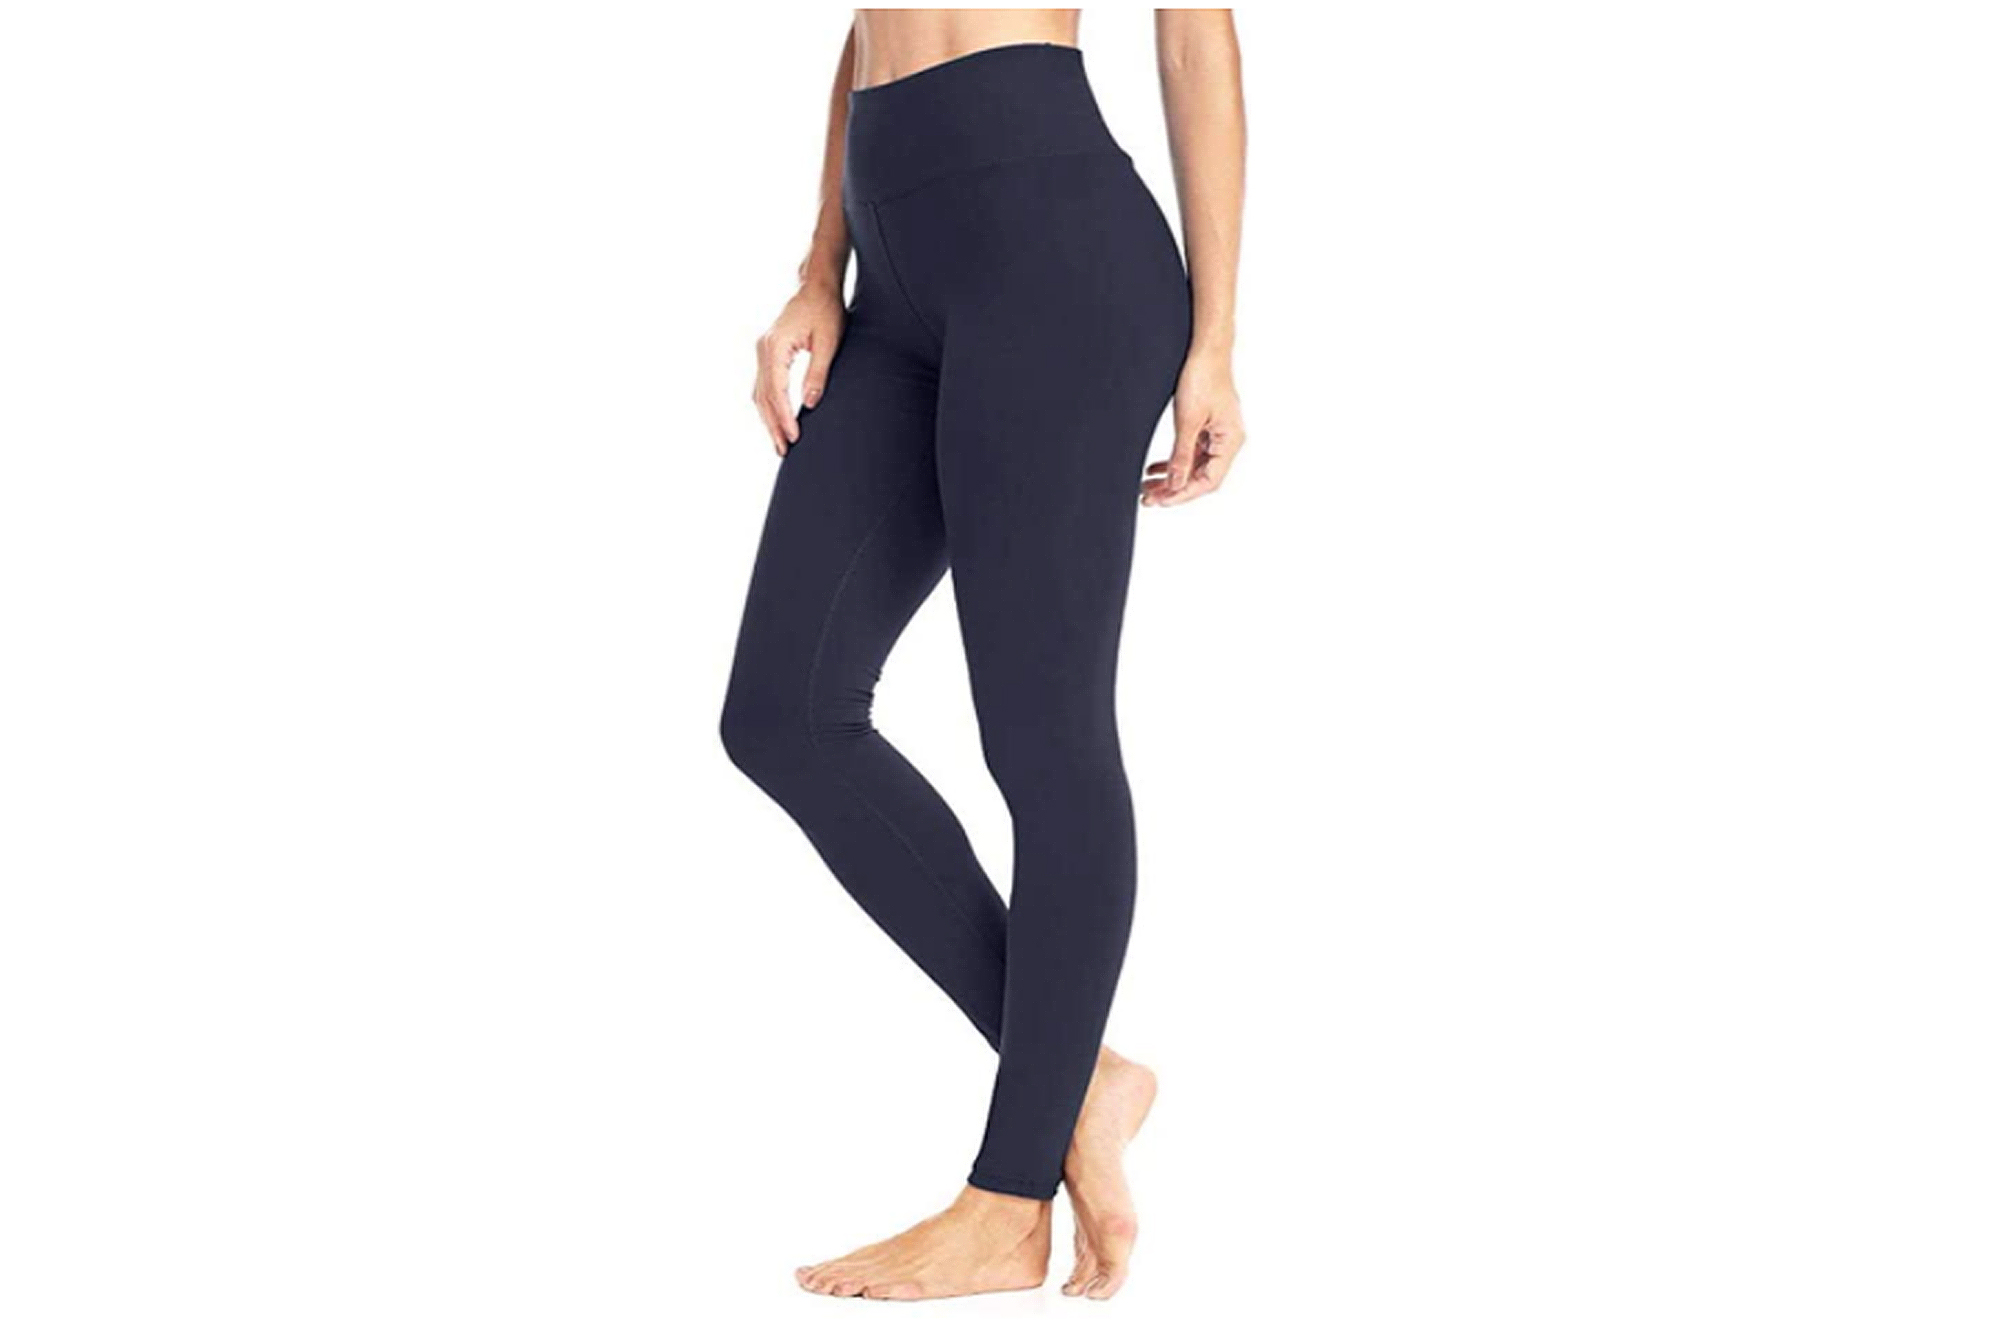 SYRINX No. 1 Bestselling Leggings Are an  Hit for a